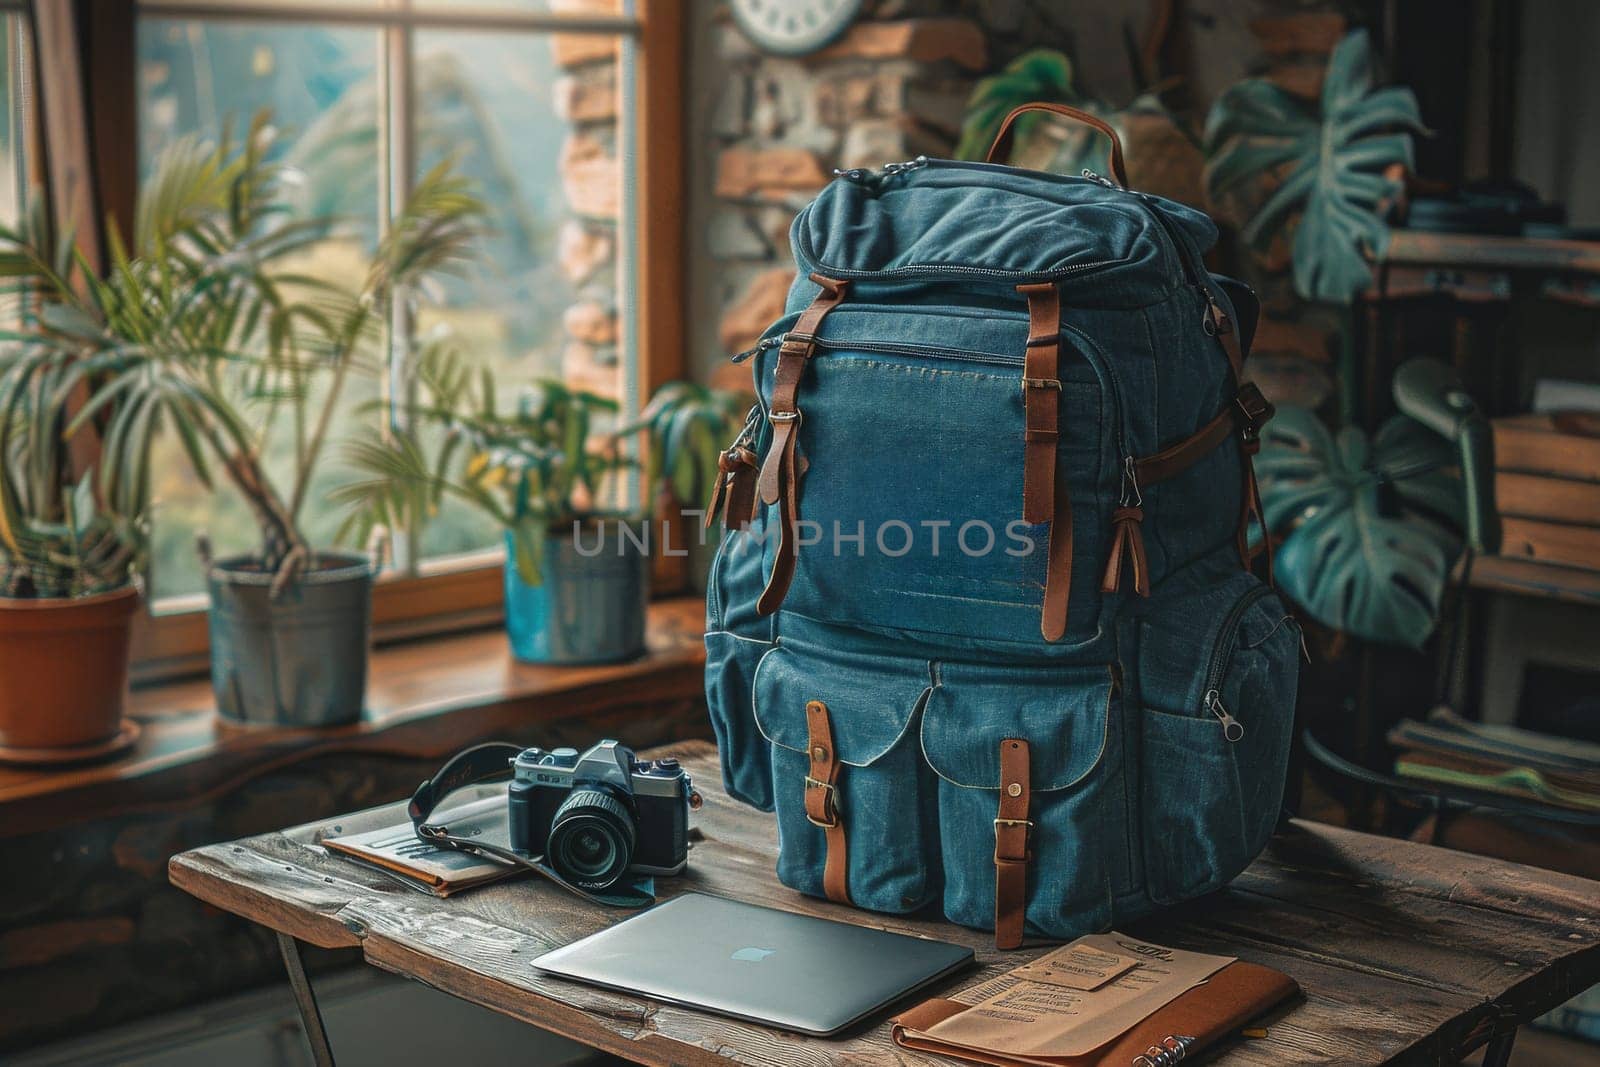 A blue backpack with a map of the world on it sits on a desk next to a laptop and a camera